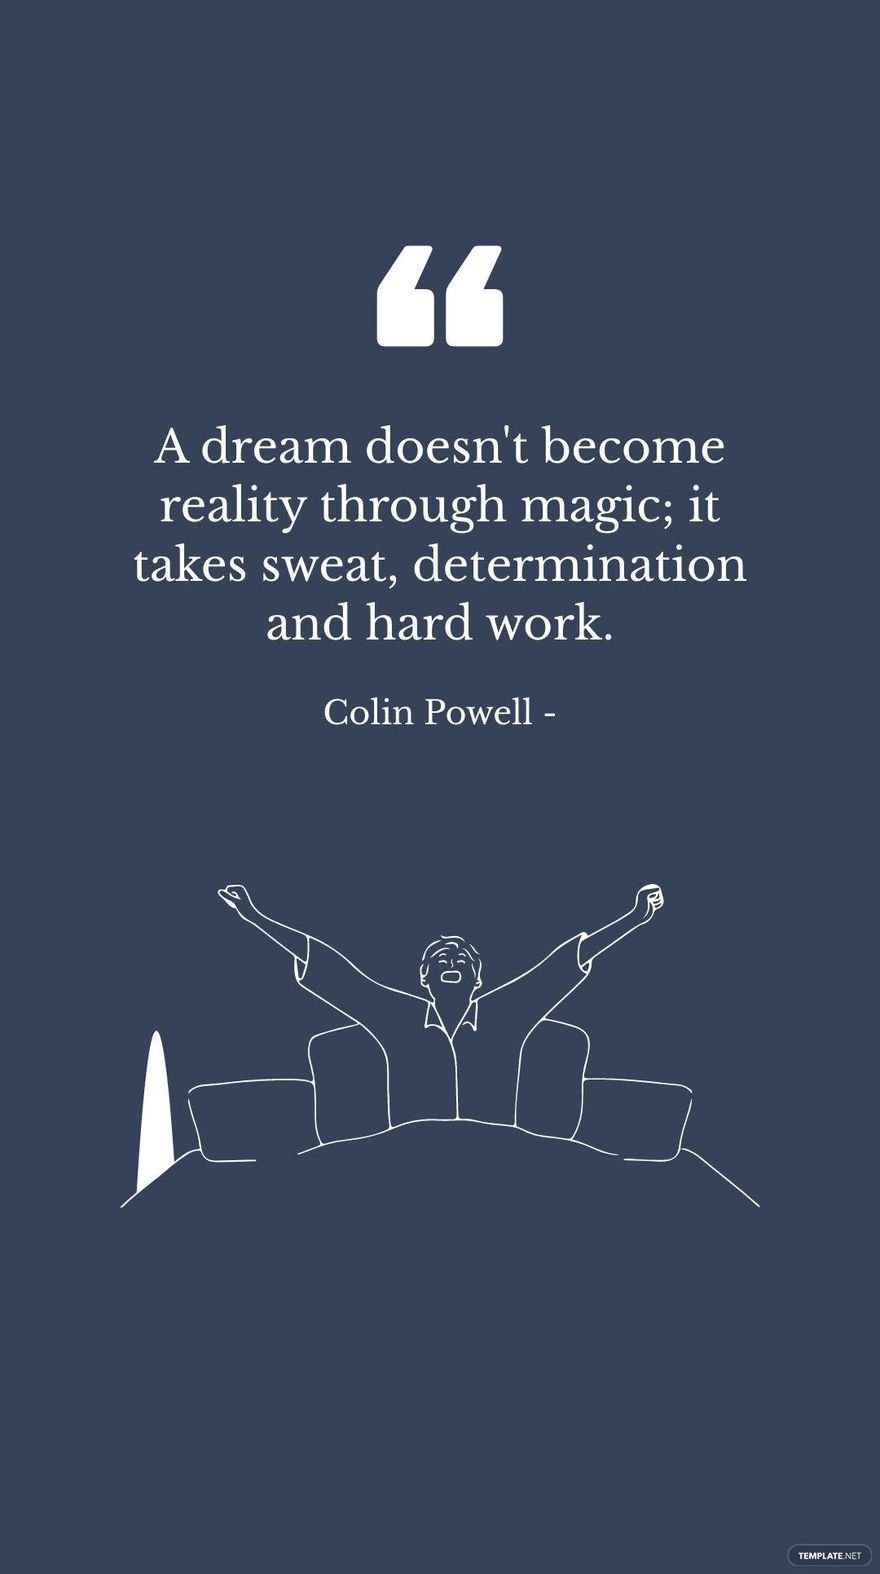 Free Colin Powell - A dream doesn't become reality through magic; it takes sweat, determination and hard work. in JPG